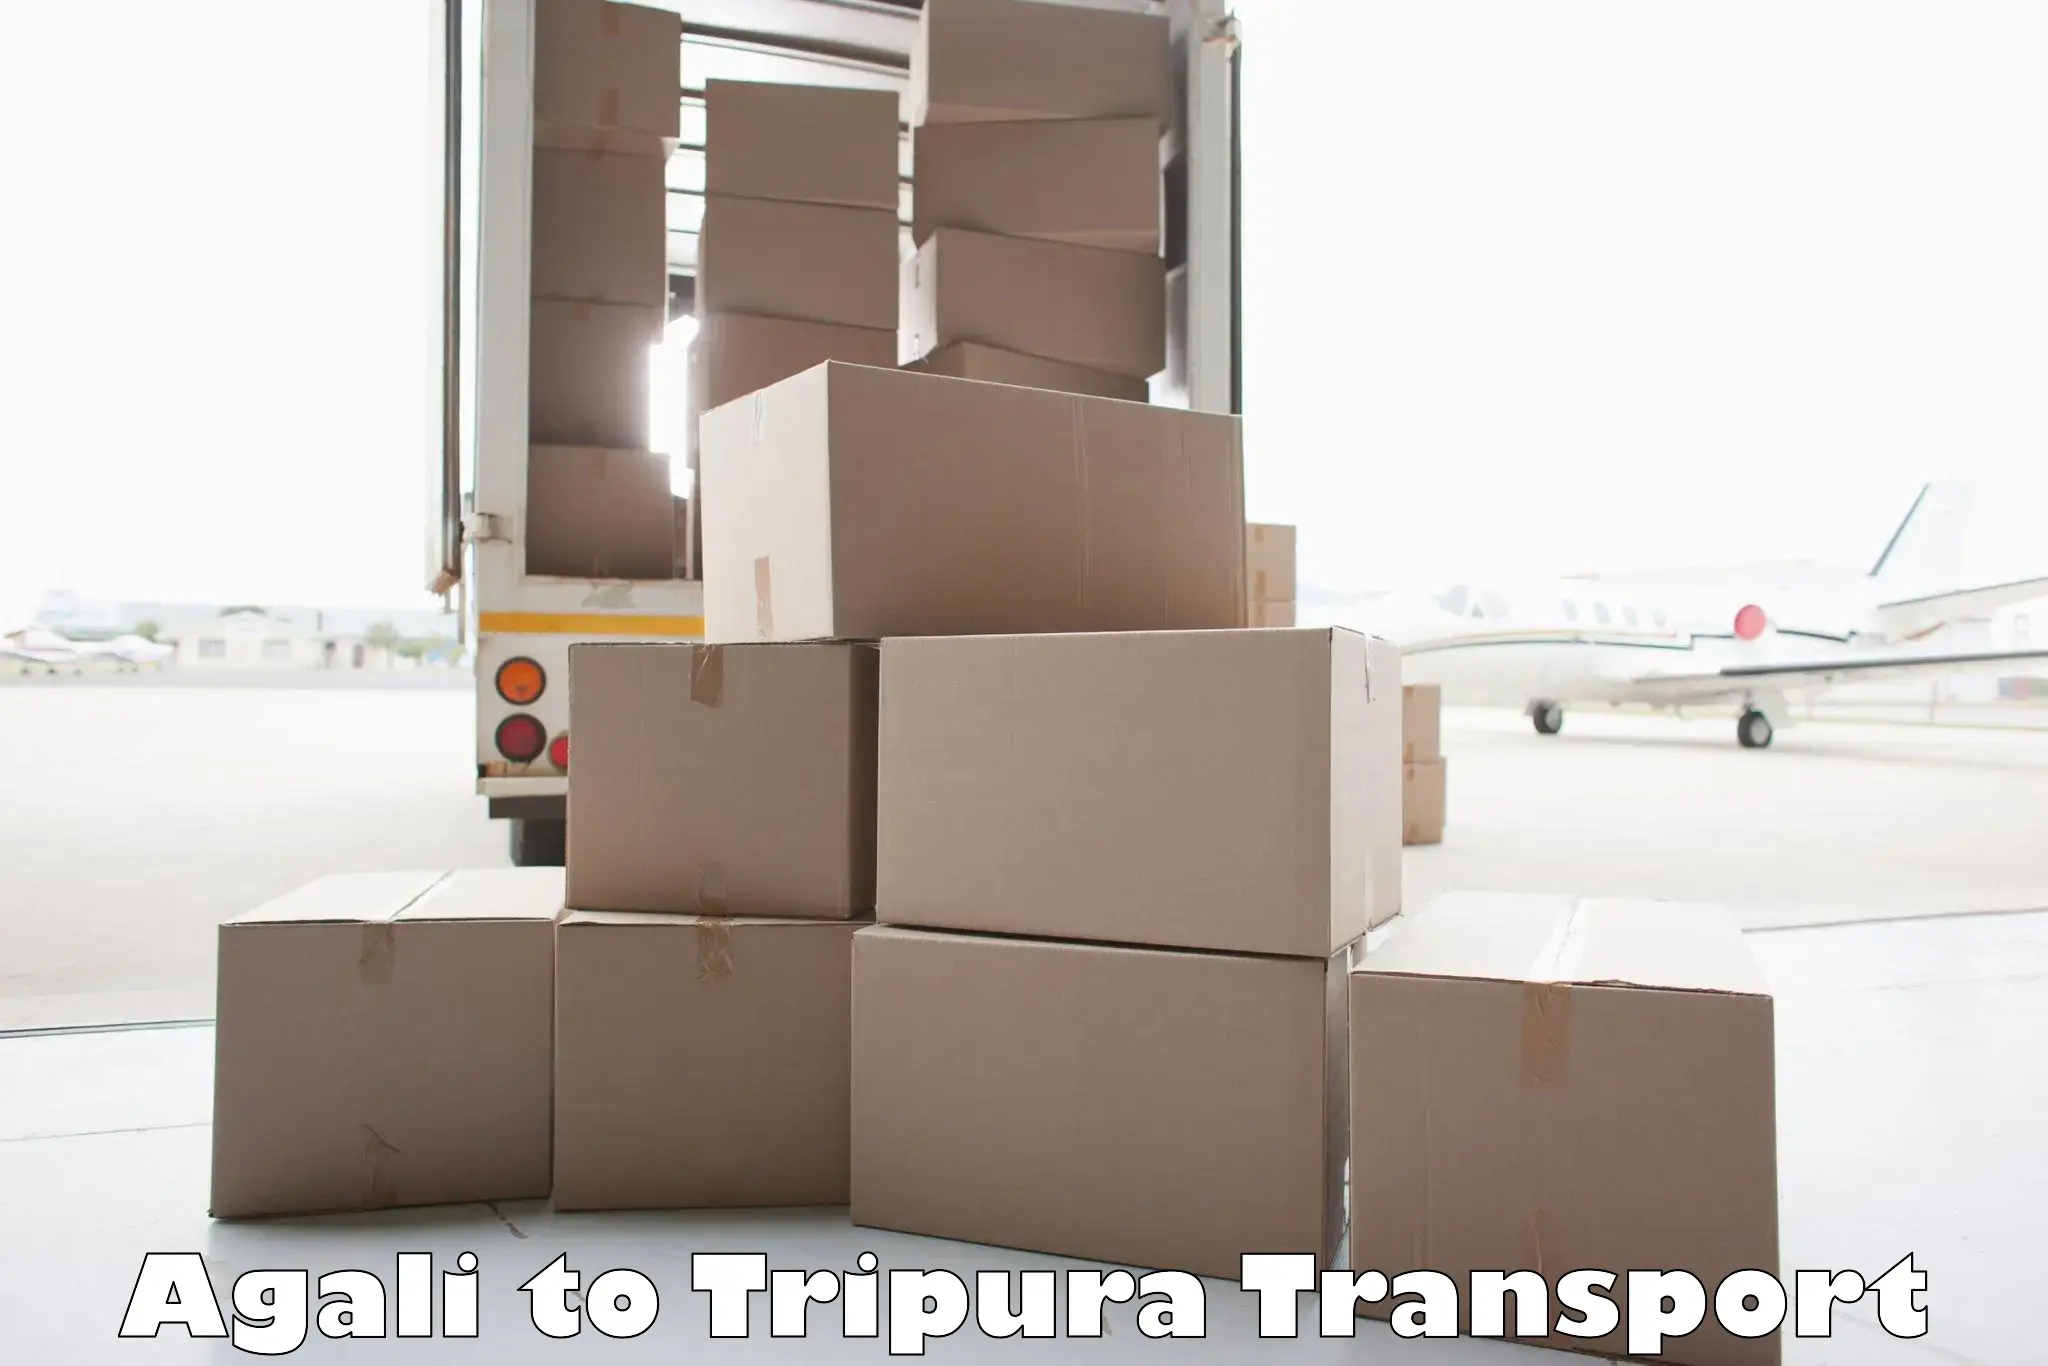 Daily transport service Agali to Udaipur Tripura